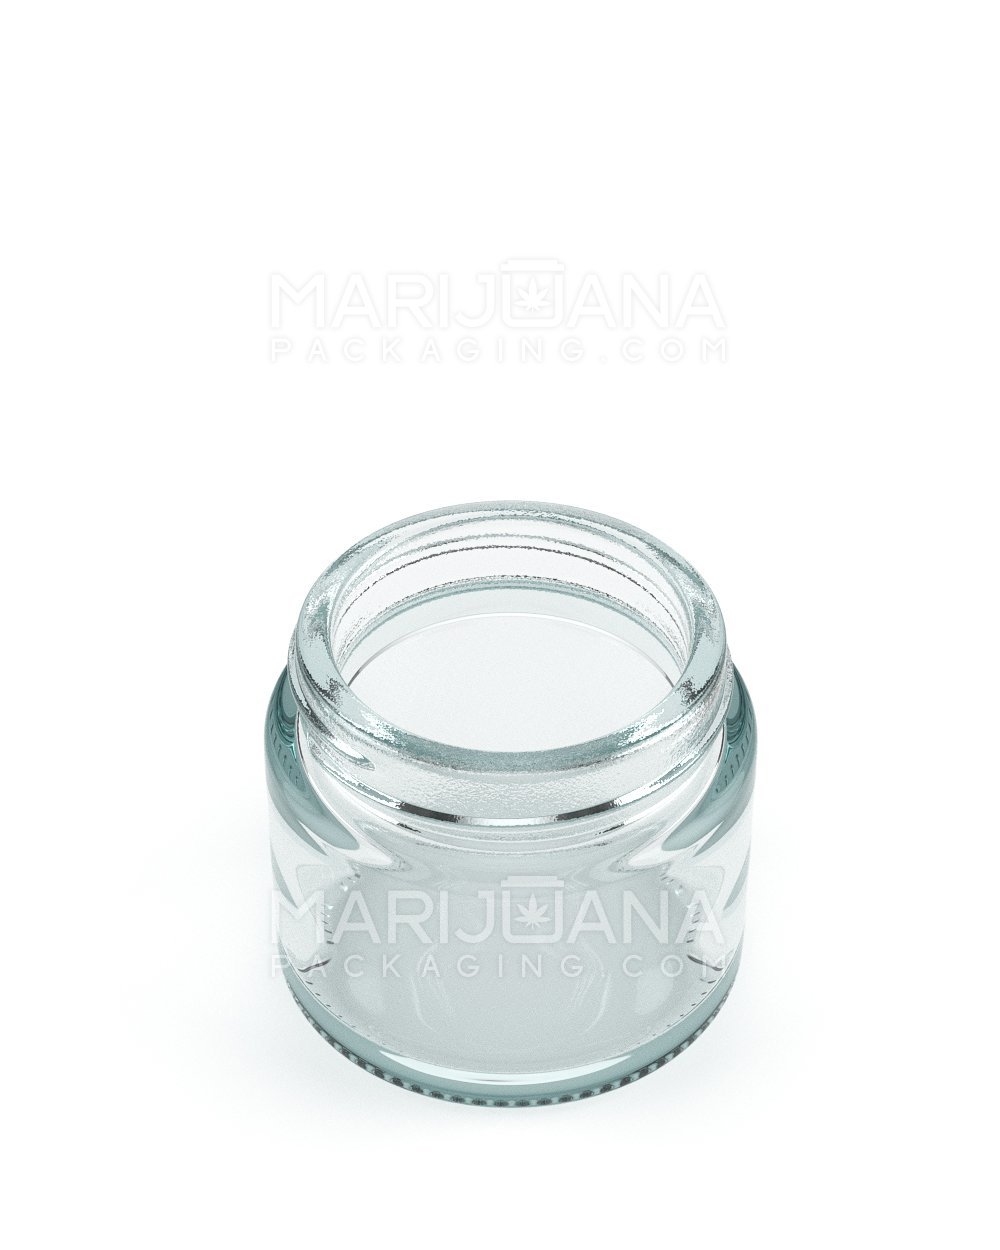 Straight Sided Clear Glass Jars | 50mm - 2oz - 200 Count - 2